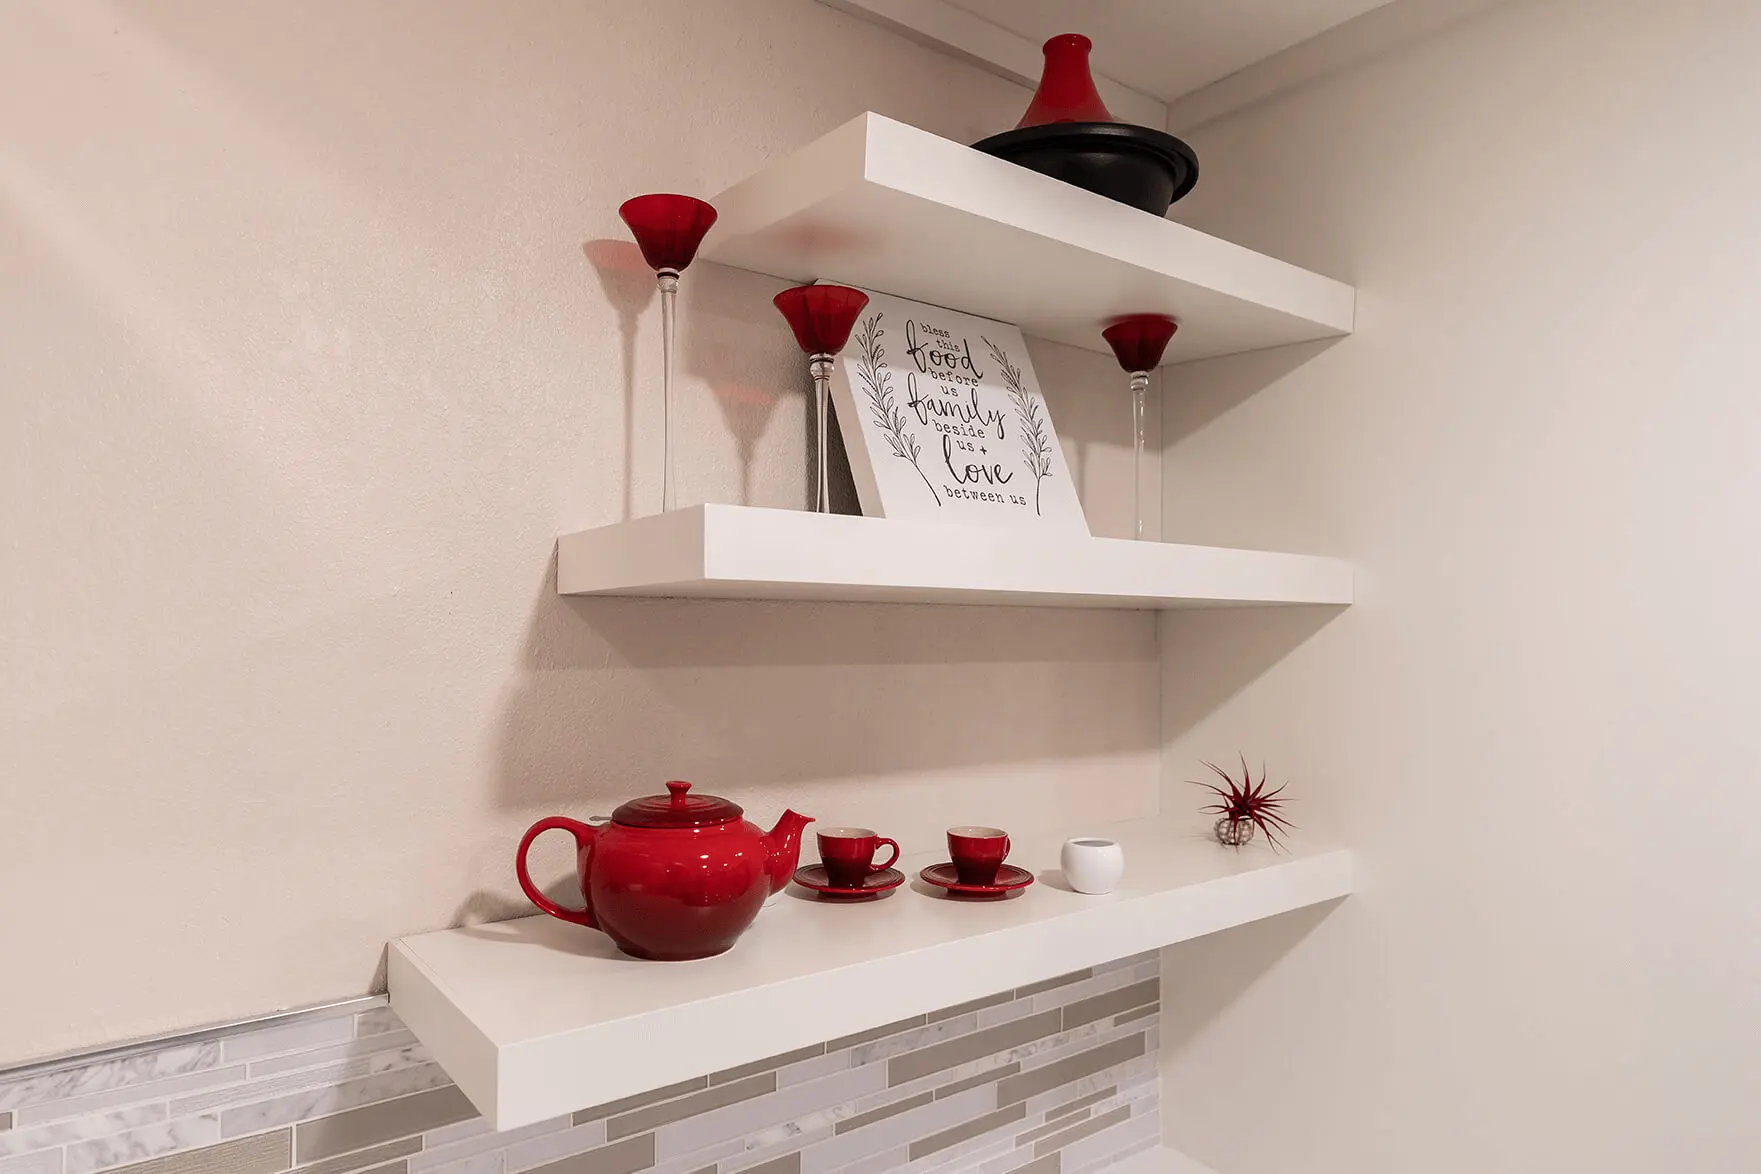 Our everlasting floating shelves are sturdy and have all-wood construction, metal mounting brackets, and a color-matching finish to your kitchen or vanity cabinets.